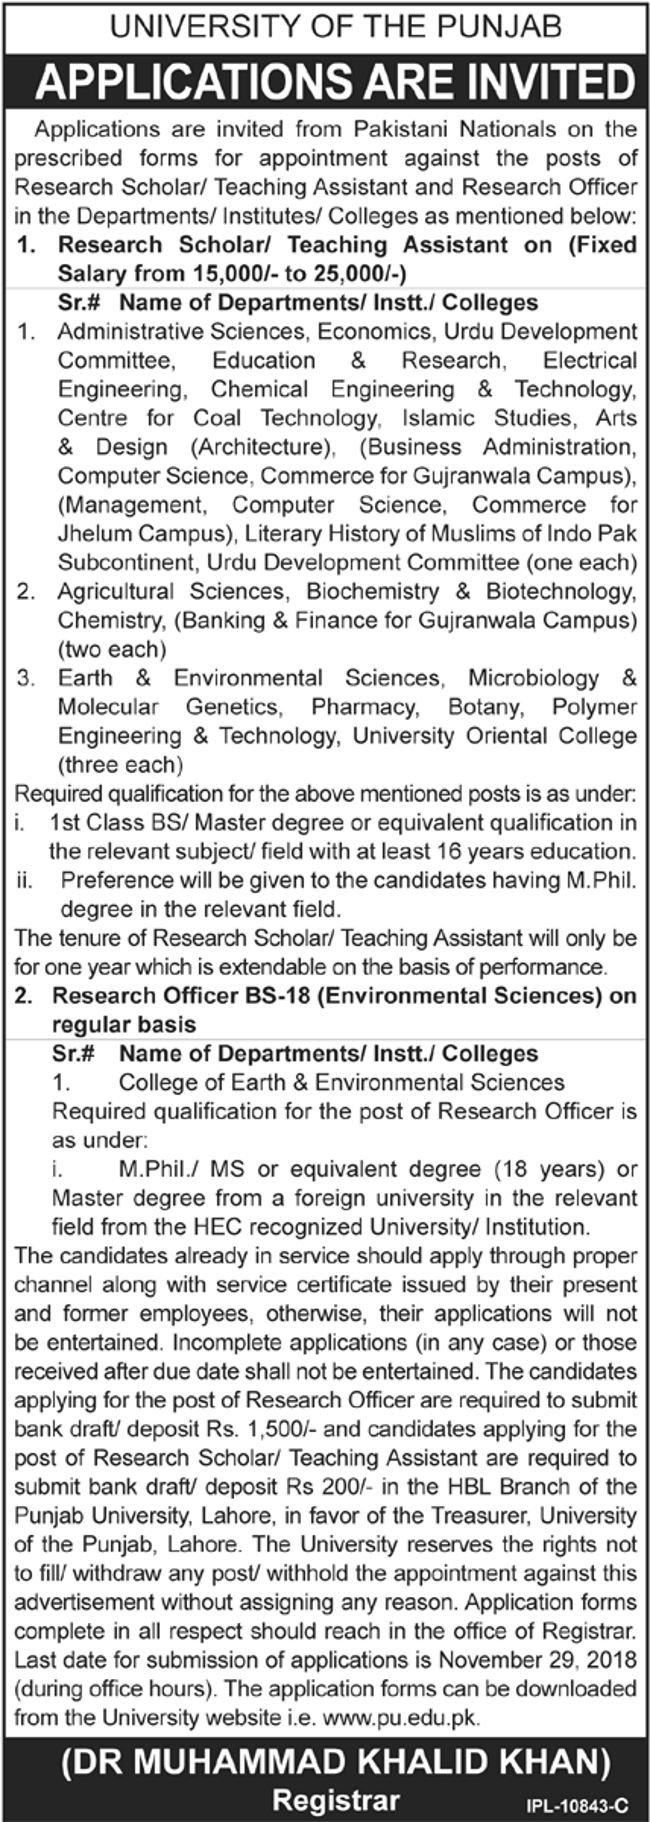 University of Punjab Jobs 2018 for Research/Teaching Assistant & Research Officer Posts 13 November, 2018